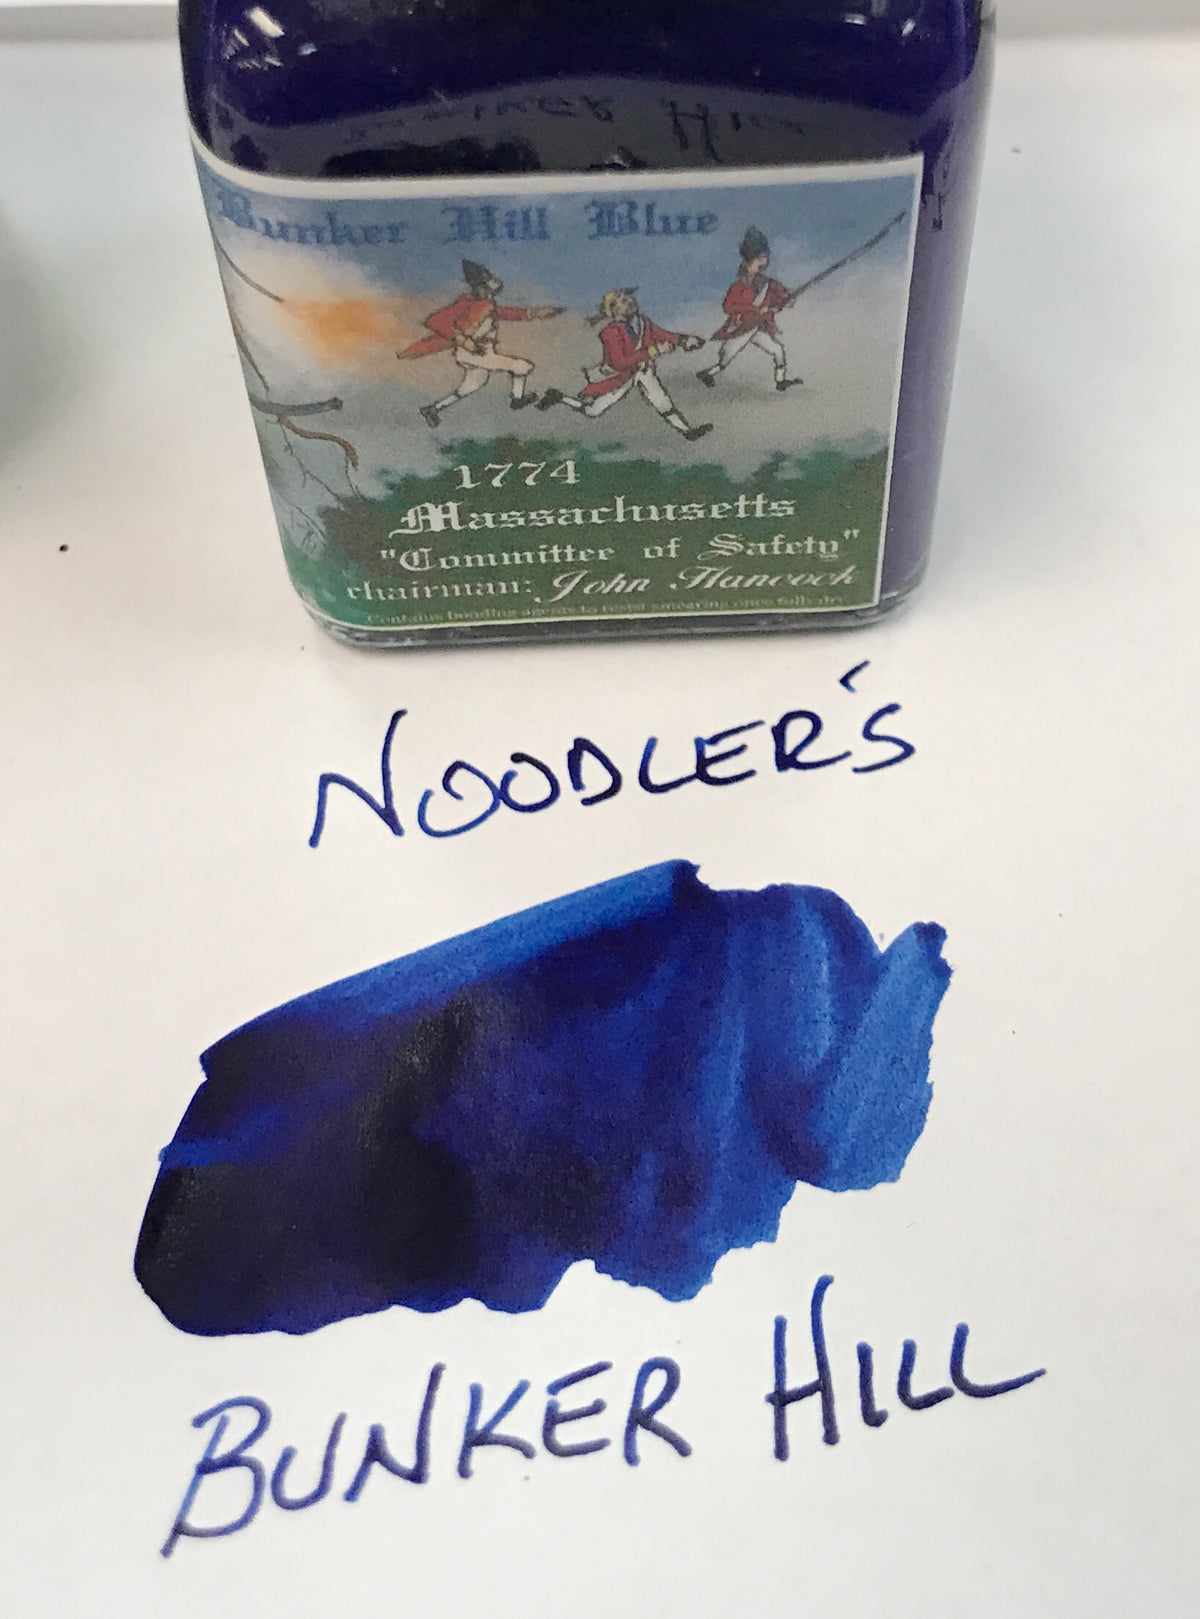 NOT for use with fountain pens  4.5oz bottle of blue bulletproof ink from Noodler's, made in USA.  A water based bonded ink without any alcohol solvents - nor any gum arabic!  Bonded inks once dry, will resist smearing when covered by watercolors and many other aqueous media.  Shake the bottle for the Patriots and the Hessians will behave obediently in their water column.